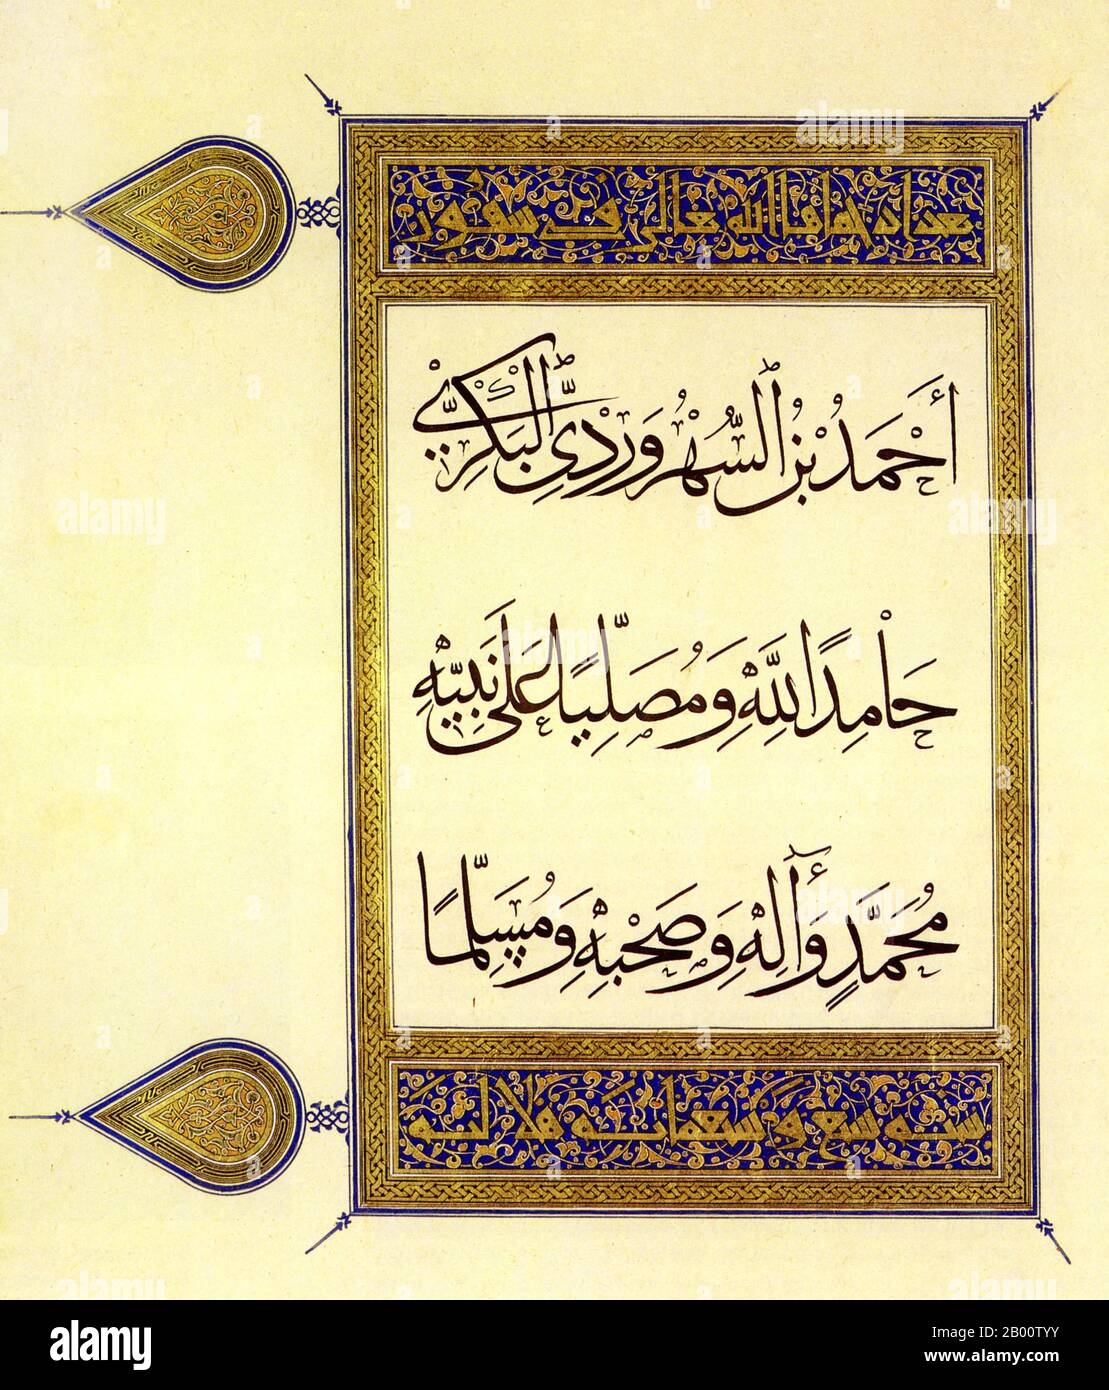 Iraq: A 14th-century page of the Qur’an from Baghdad where new papermaking techniques allowed artisans to produce large polished sheets such as this one.  The texts in the stylized headings on the top and bottom of the illustration indicate the chapters and the year of the work, 1307. The inscription in the centre reads: ‘Ahmad ibn al-Suhrawardi al-Bakri [the calligrapher’s name], who thanks God and sends prayers and greetings to the Prophet Muhammed, his family and companions’. Stock Photo